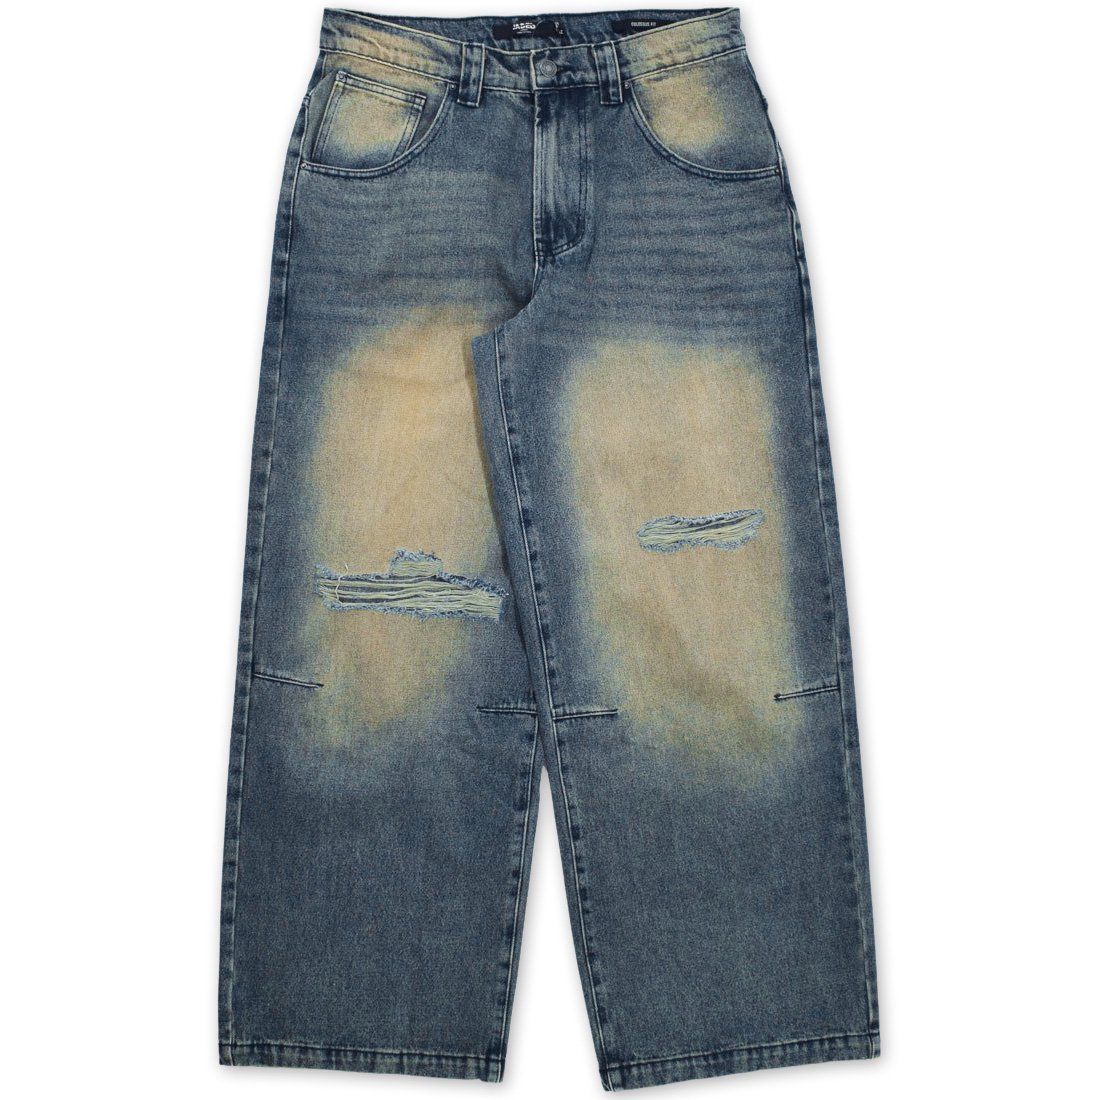 JADED LONDON BUSTED COLOSSUS JEANS - Spyder｜セレクトショップ ...